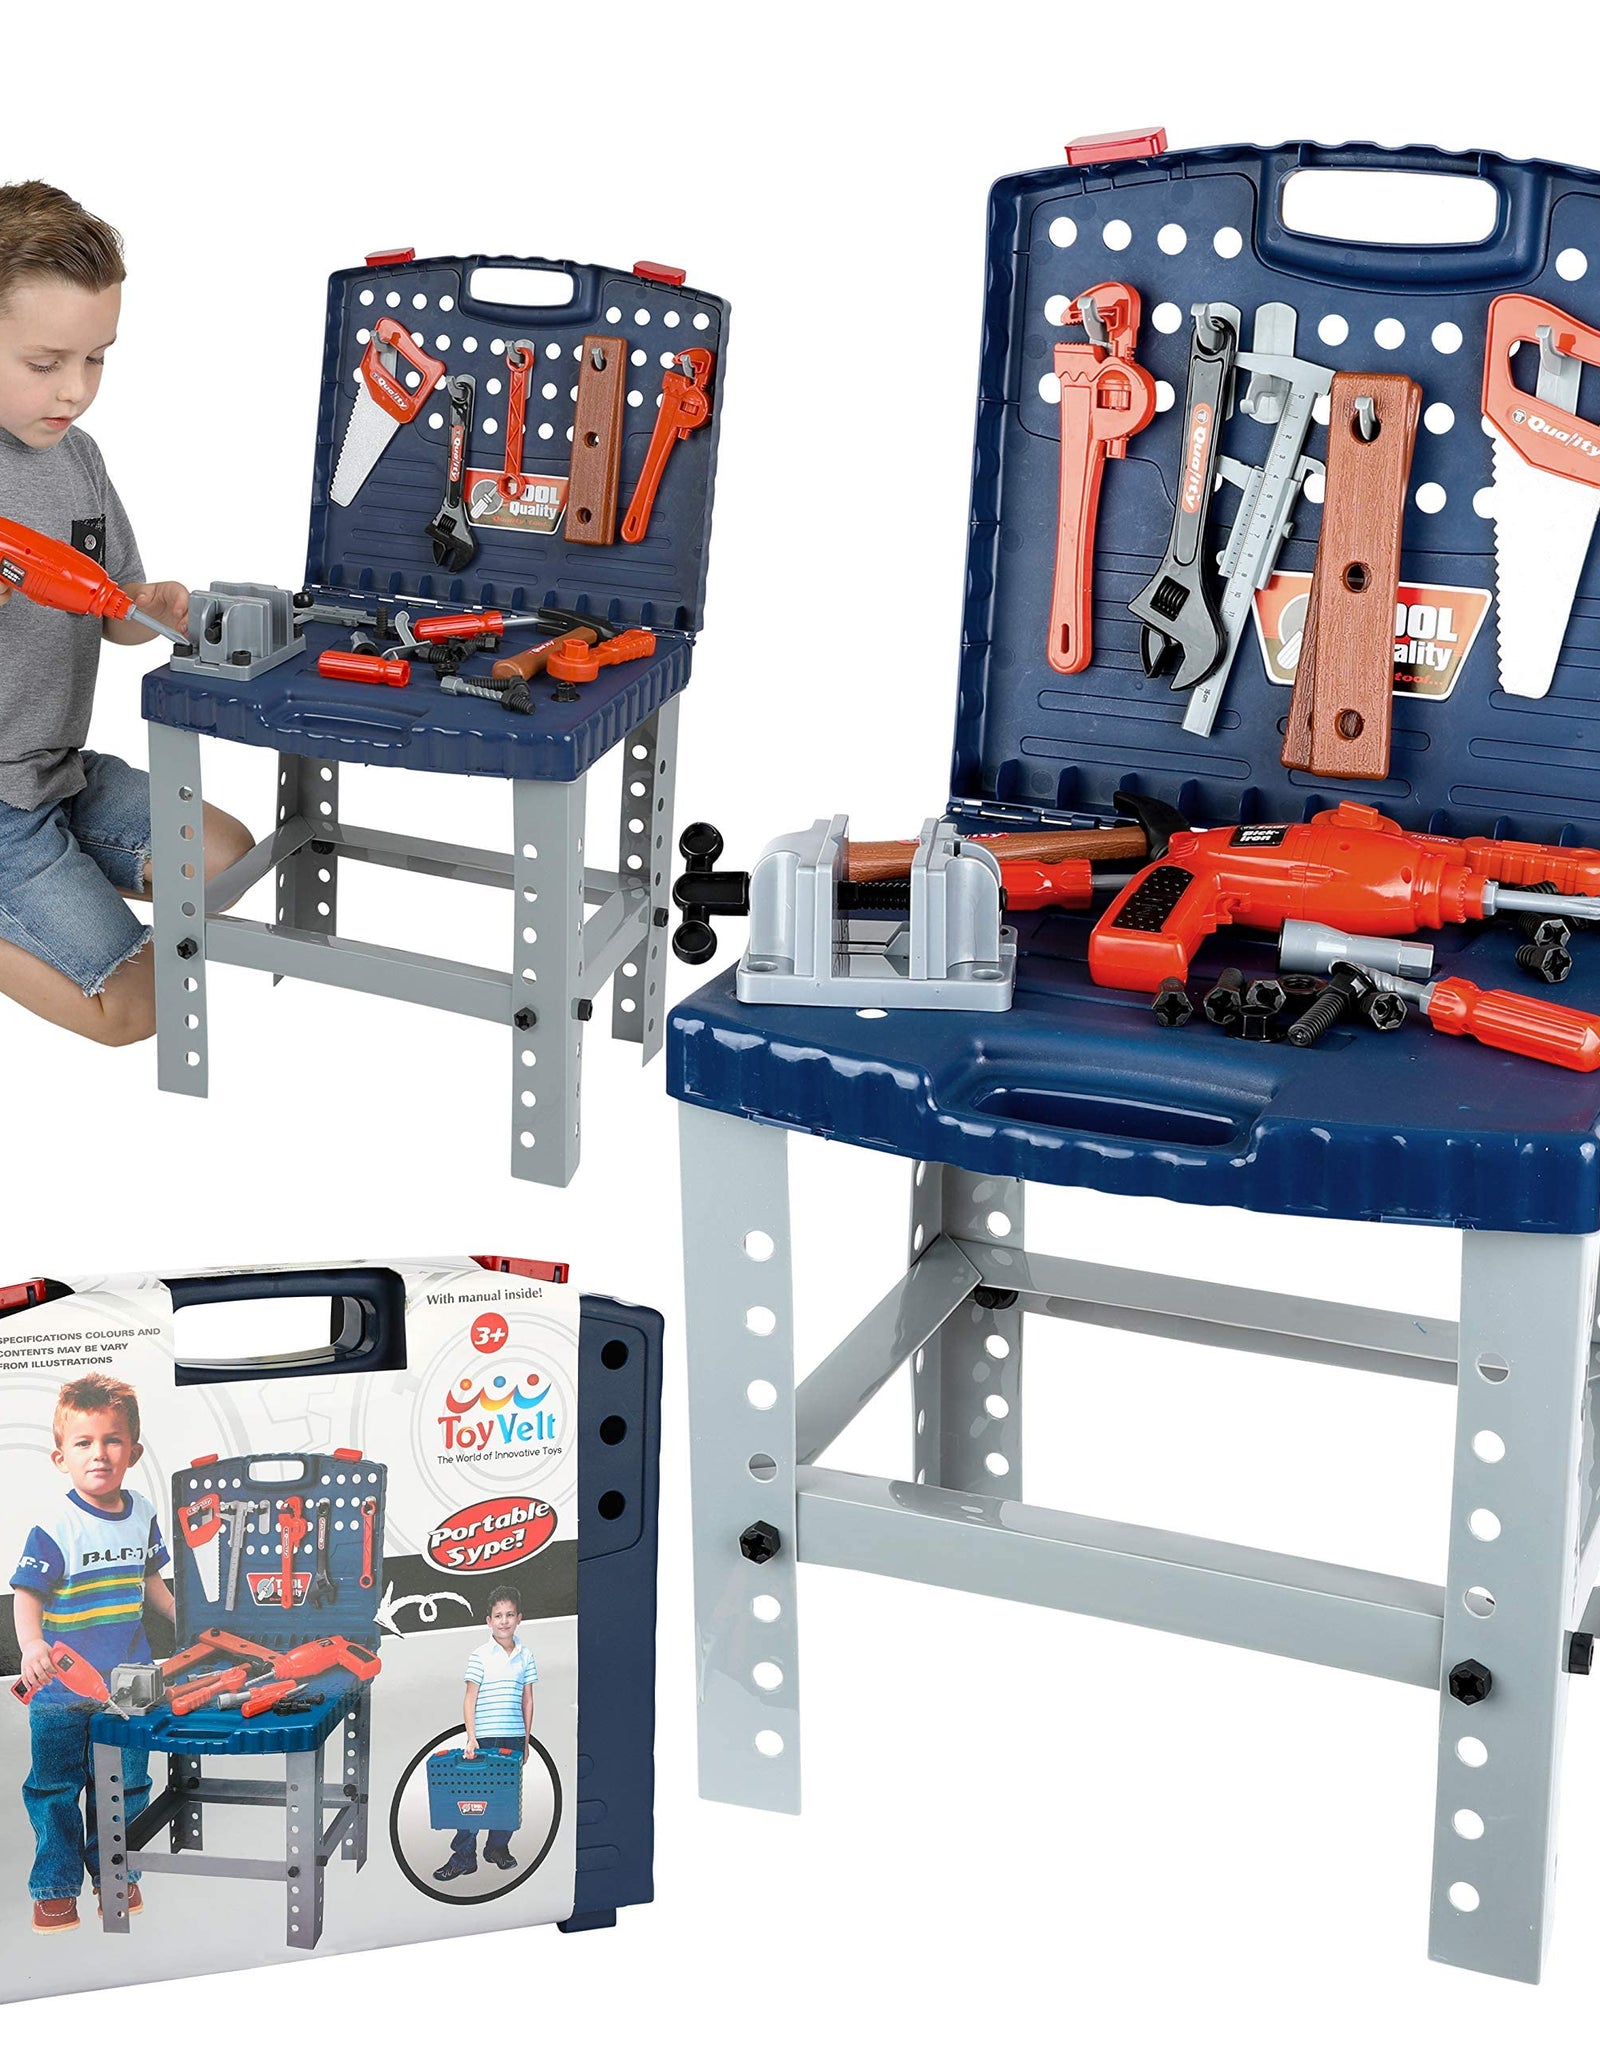 ToyVelt Kids Tool Set Toddler Workbench W Realistic Tools & Electric Drill For Construction Workshop Tool Bench, Stem Educational Pretend Play, Best Gift Toys For Boys & Girls Age 3, 4, 5, 6 and Up